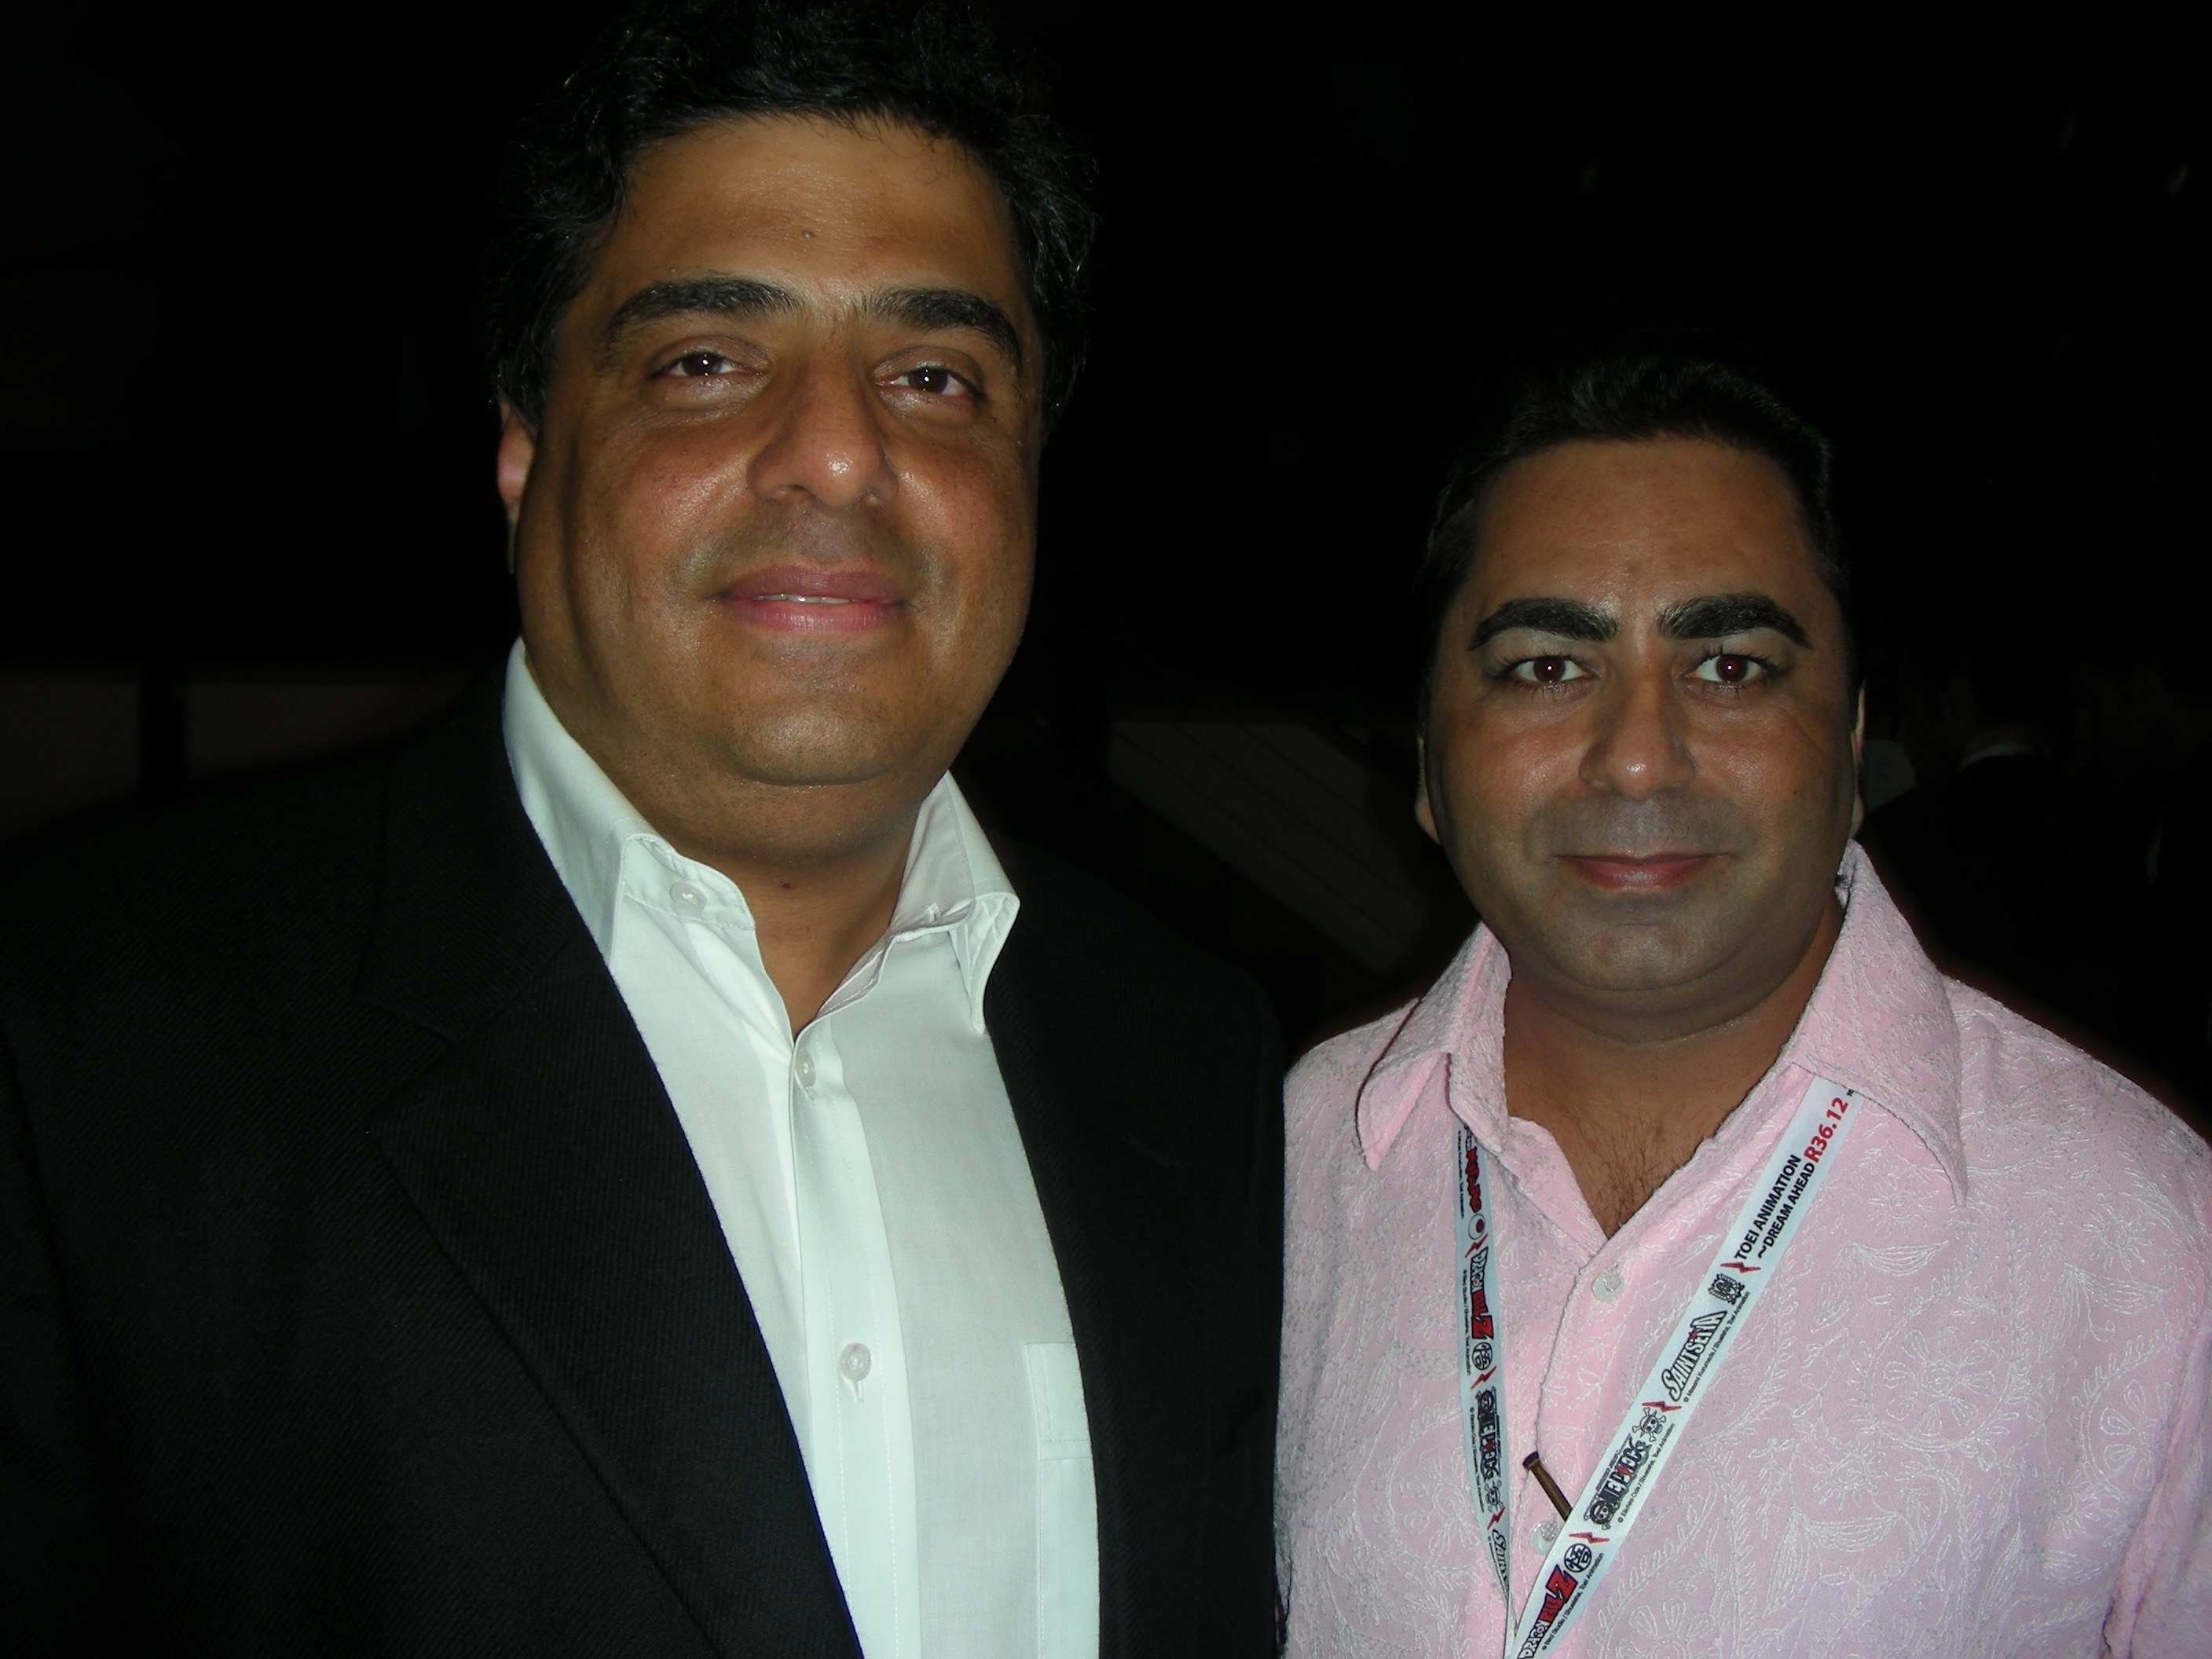 October 8,2007 With Film Producer Ronnie Screwwala At MIPCOM, Cannes, France